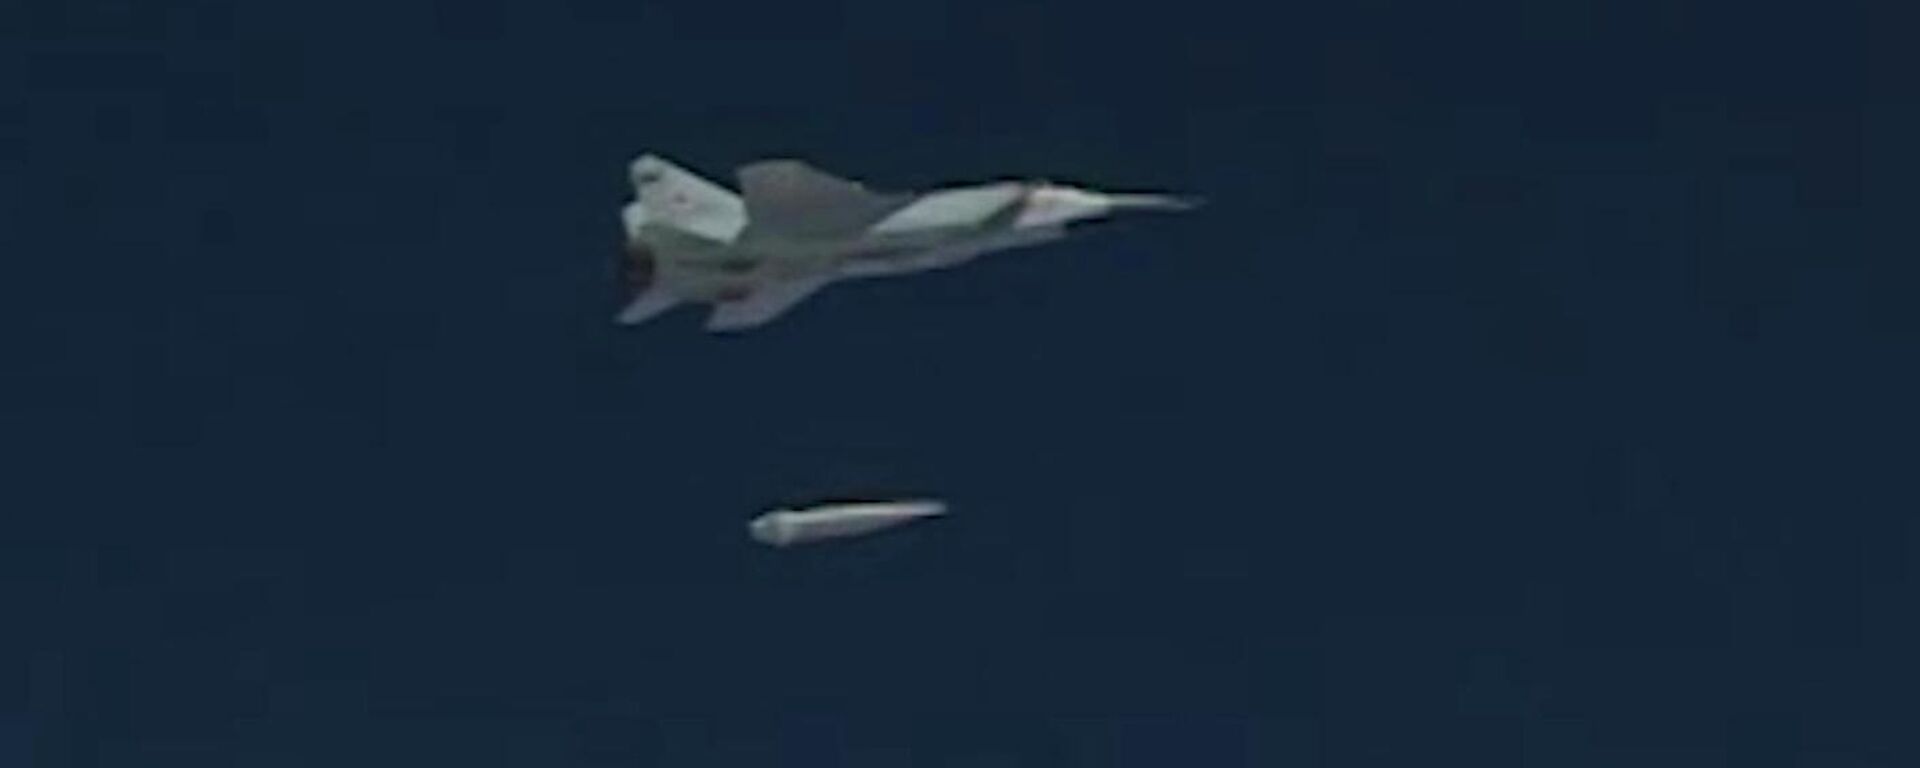 Russia's Kinzhal hypersonic missile being fired. File photo screengrab of MoD video. - Sputnik International, 1920, 31.12.2023